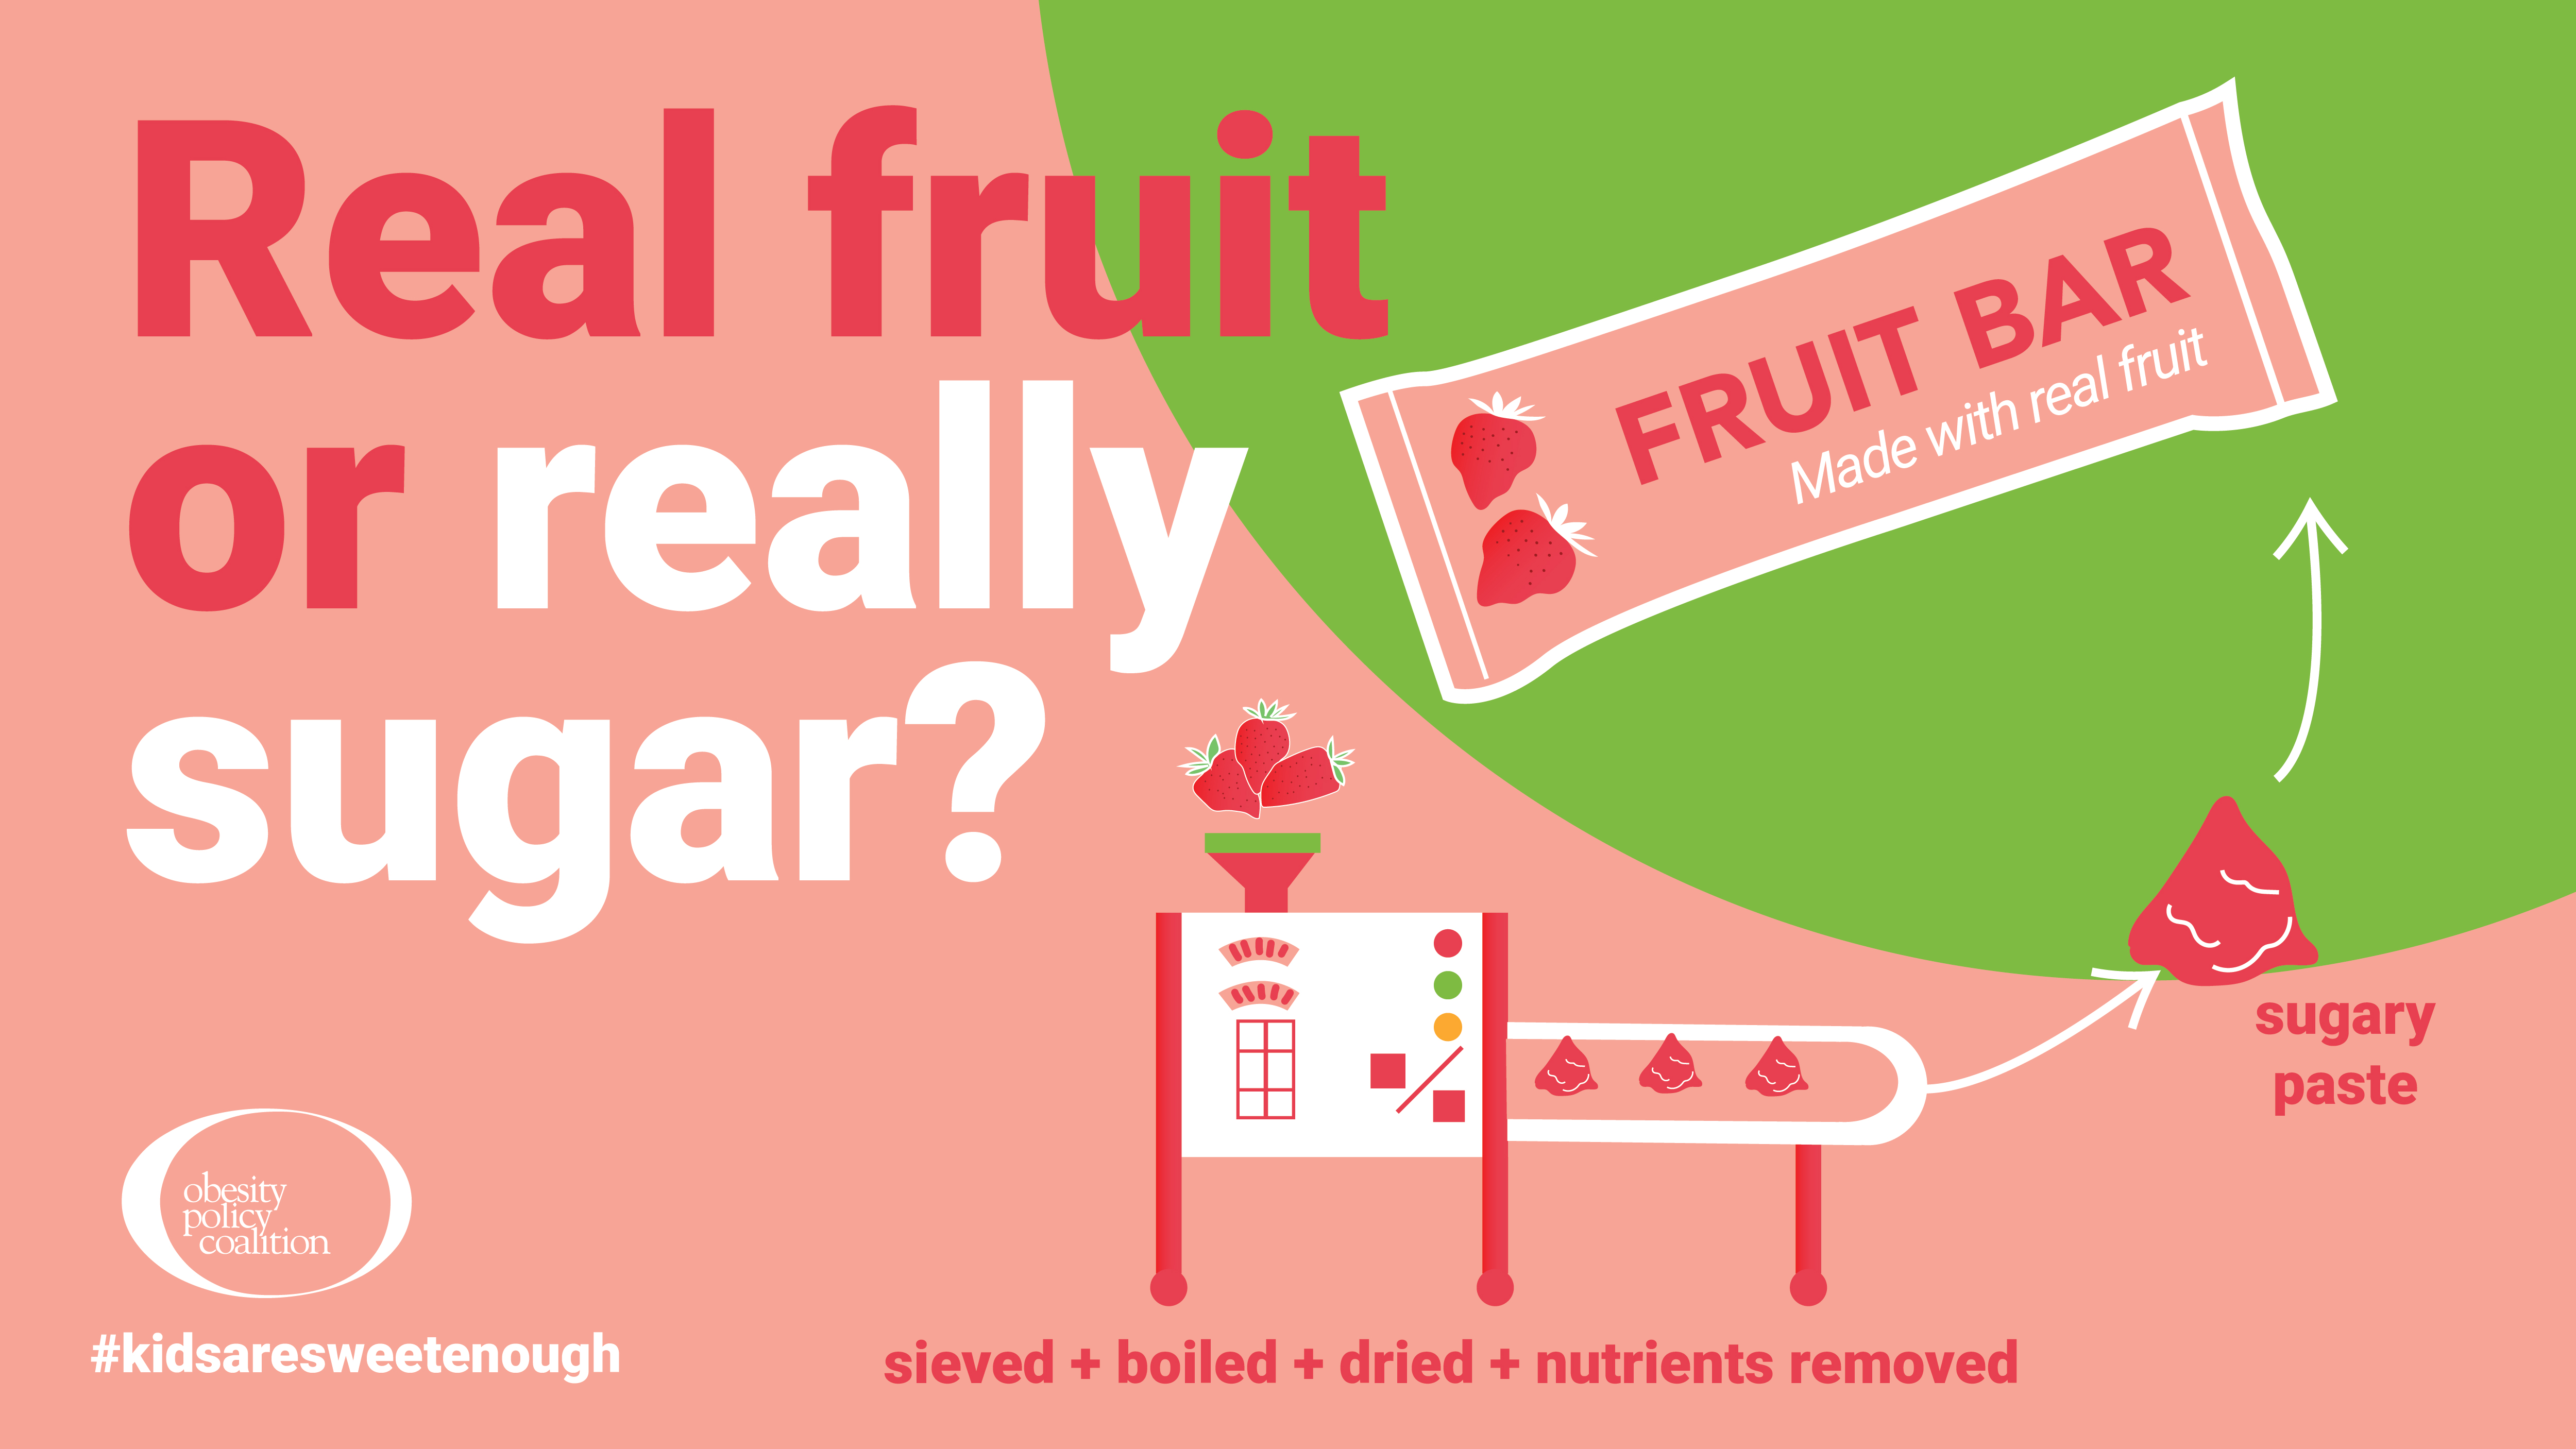 Real fruit or really sugar? Strawberries processed into a sugary paste and then put into a fruit bar boasting a made with real fruit claim